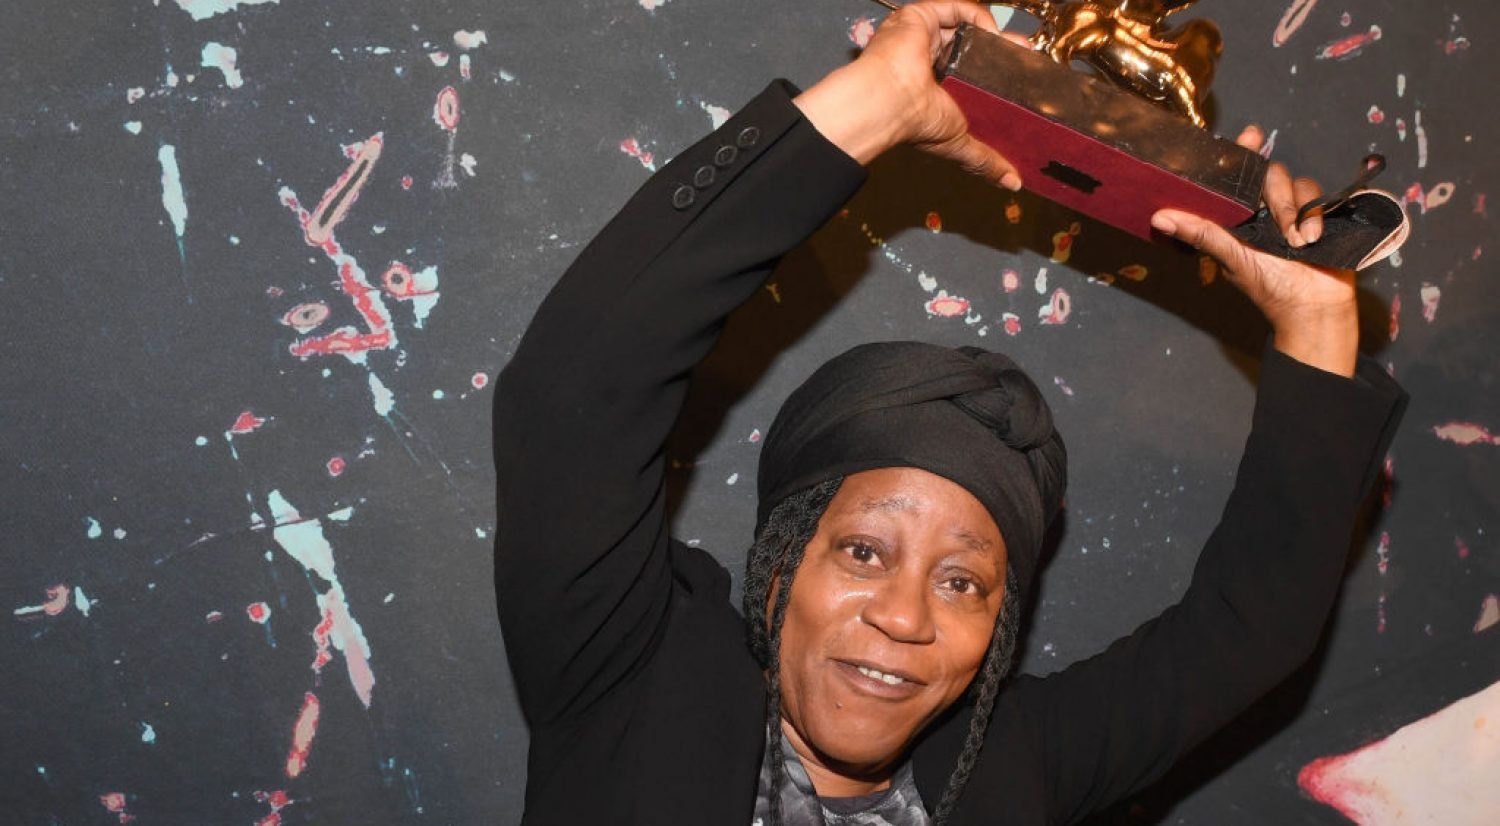 The Golden Lion for the best national pavilion was awarded to Great Britain at the 59th Art Biennale with the artist Sonia Boyce. Photo by Felix Hörhager/picture alliance via Getty Images.